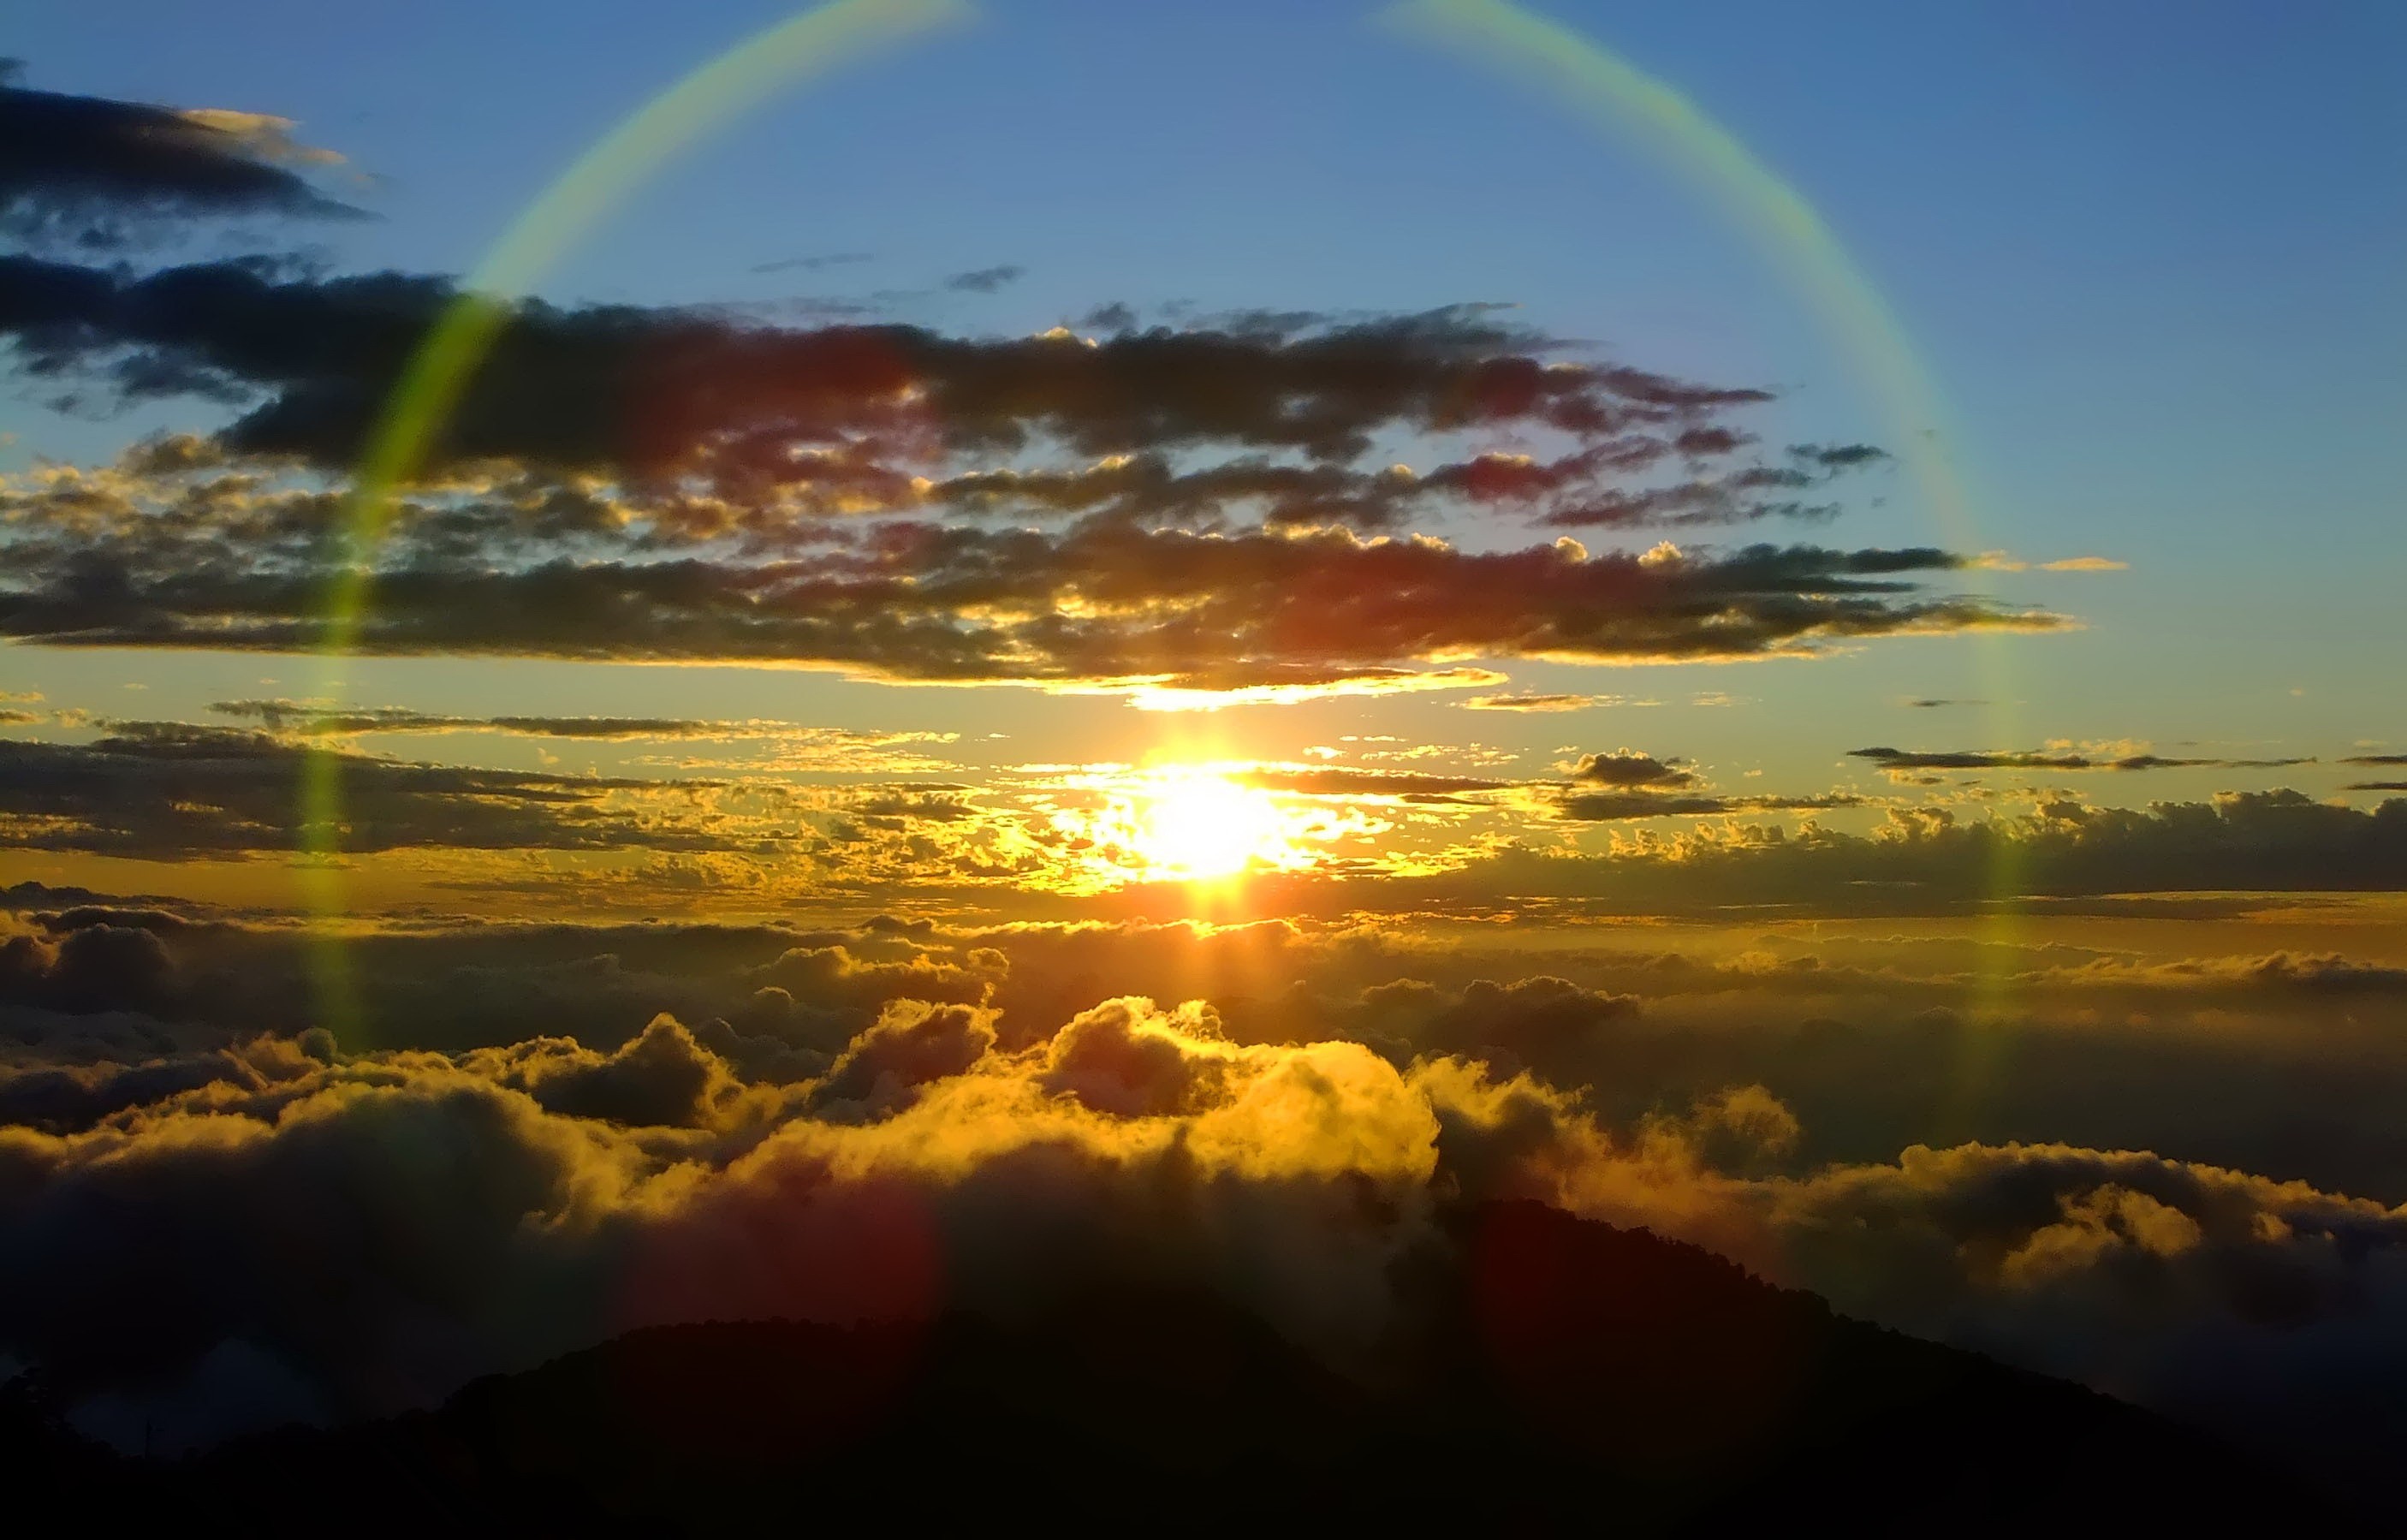 sunset, Mountains, Clouds, The, Sun, Sunlight, Skyscapes, Skies, Suns Wallpaper